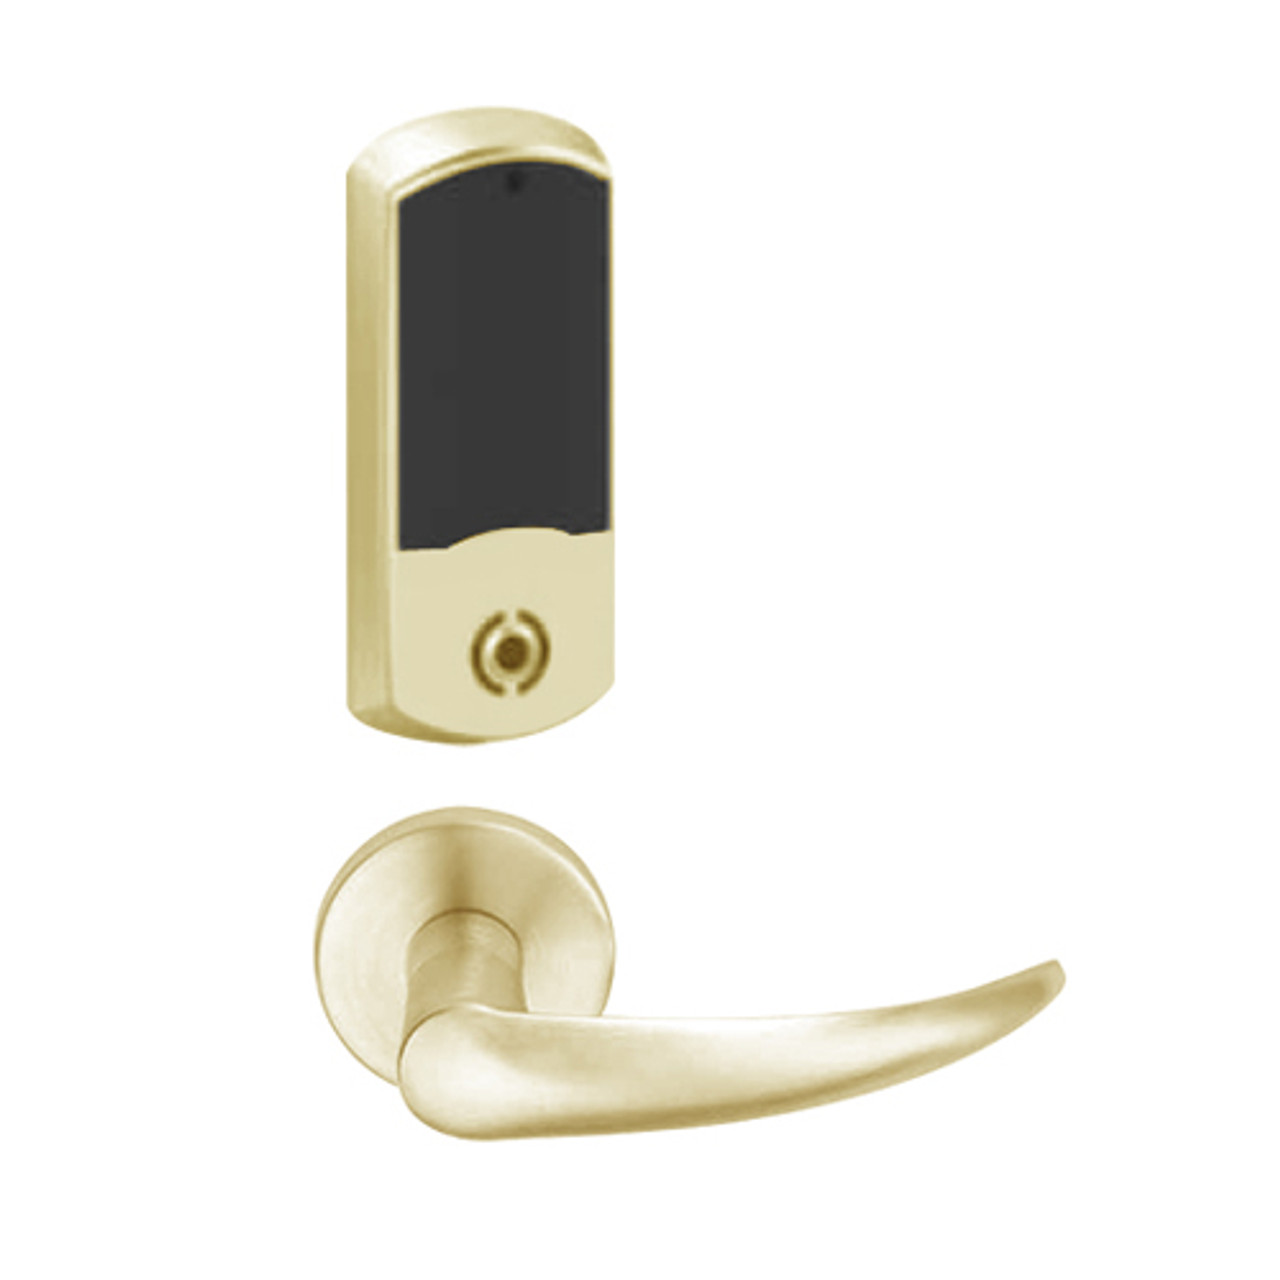 LEMS-GRW-J-OME-606-00B Schlage Storeroom Wireless Greenwich Mortise Lock with LED Indicator and Omega Lever Prepped for FSIC in Satin Brass